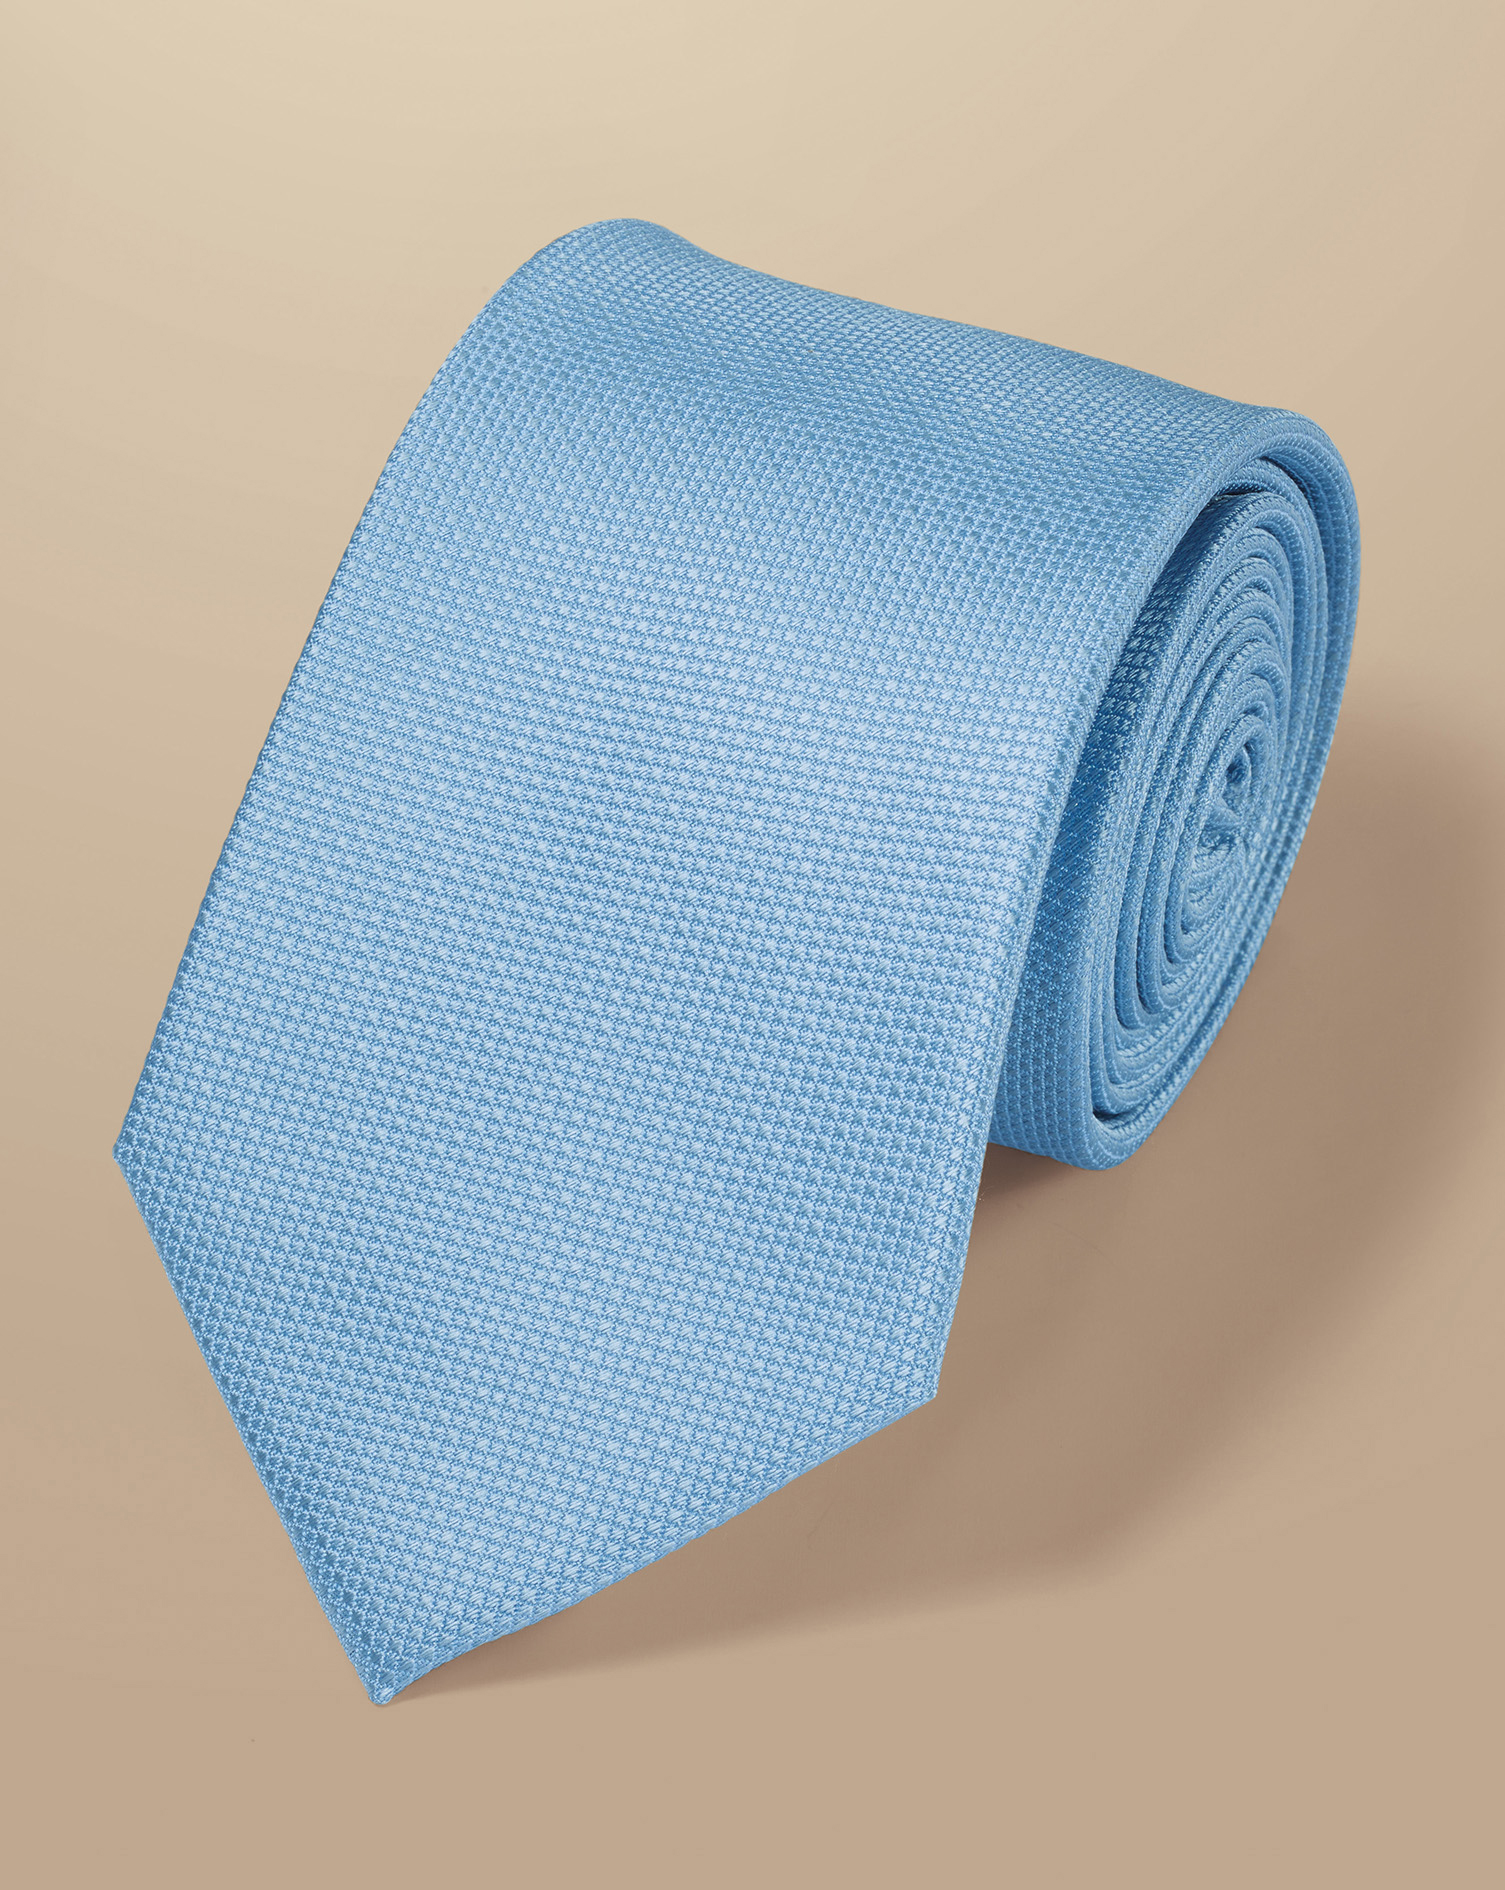 Stain Resistant Medallion Pattern Silk Tie - French Blue